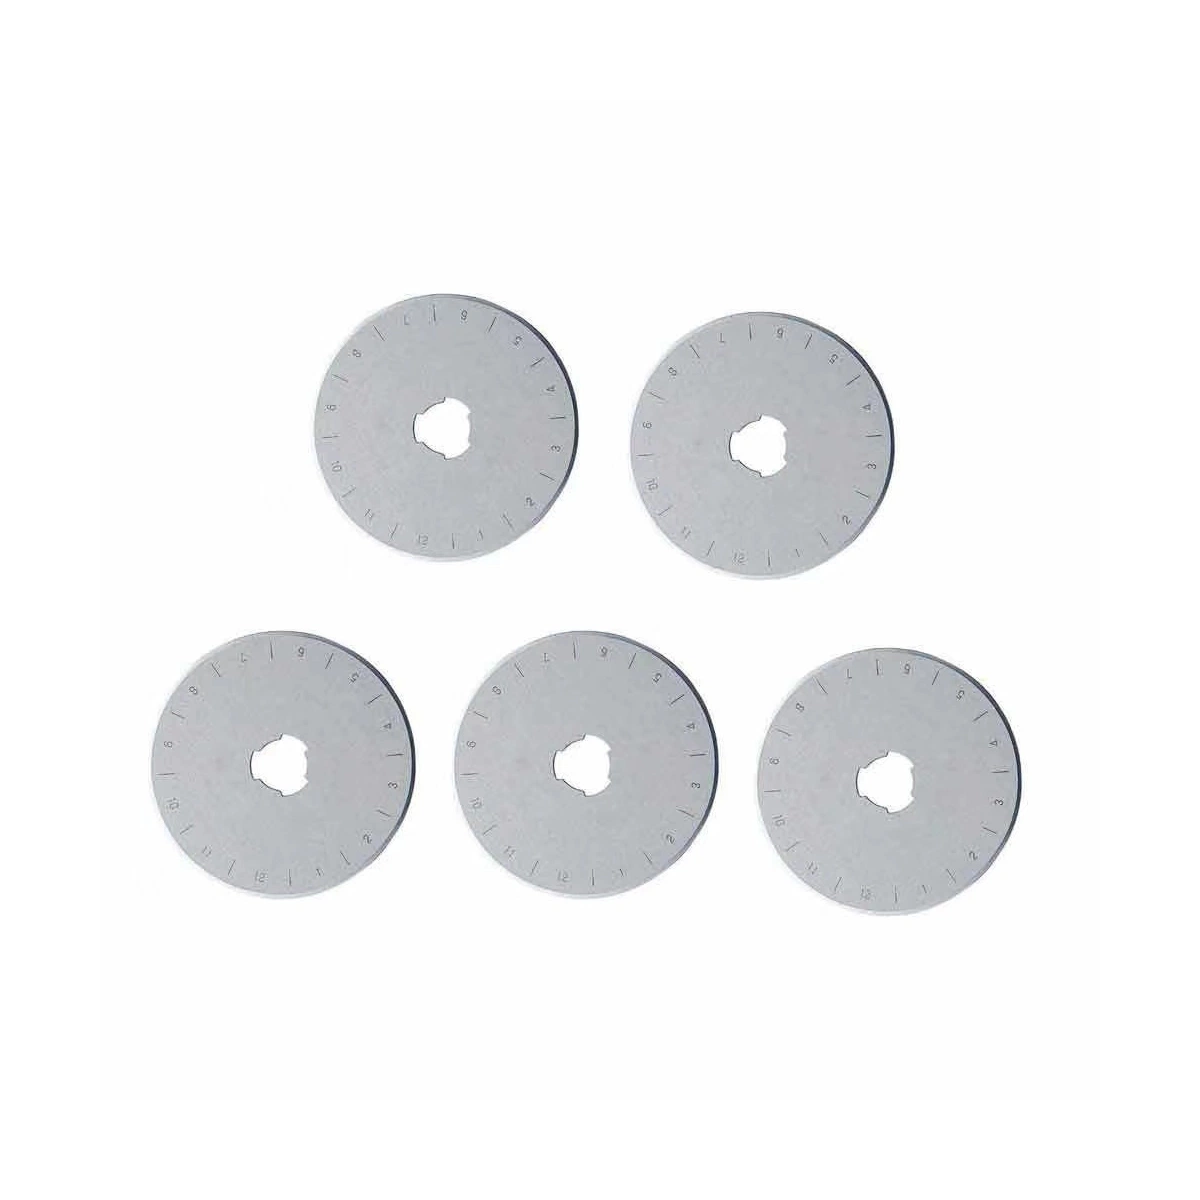 45 mm Perforating Rotary Cutter Replacement Blades for Cutting Crafting